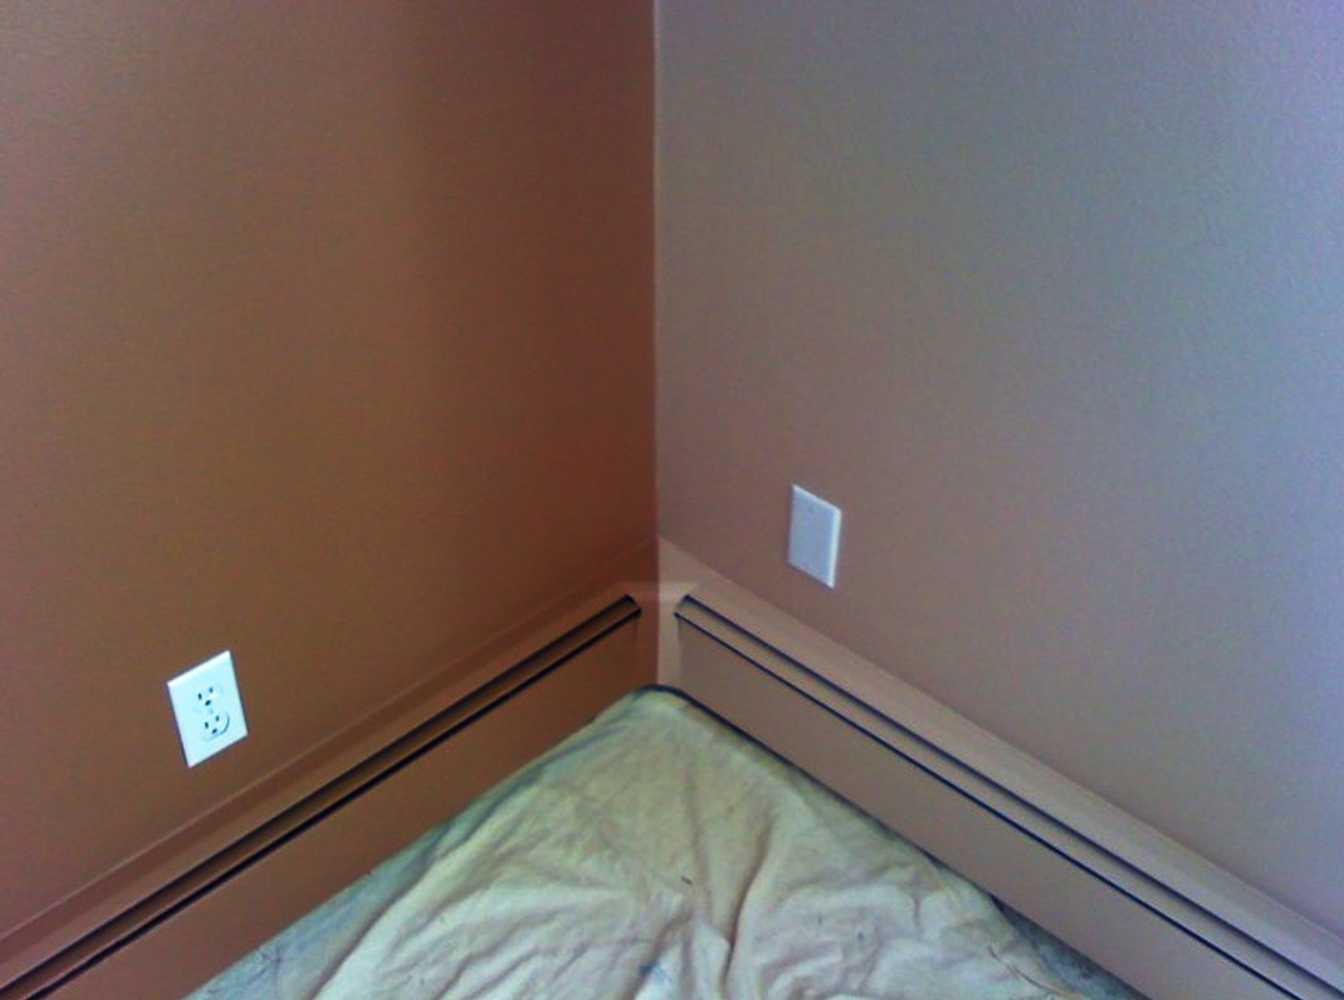 Homeowner requested two great colors for an updated look